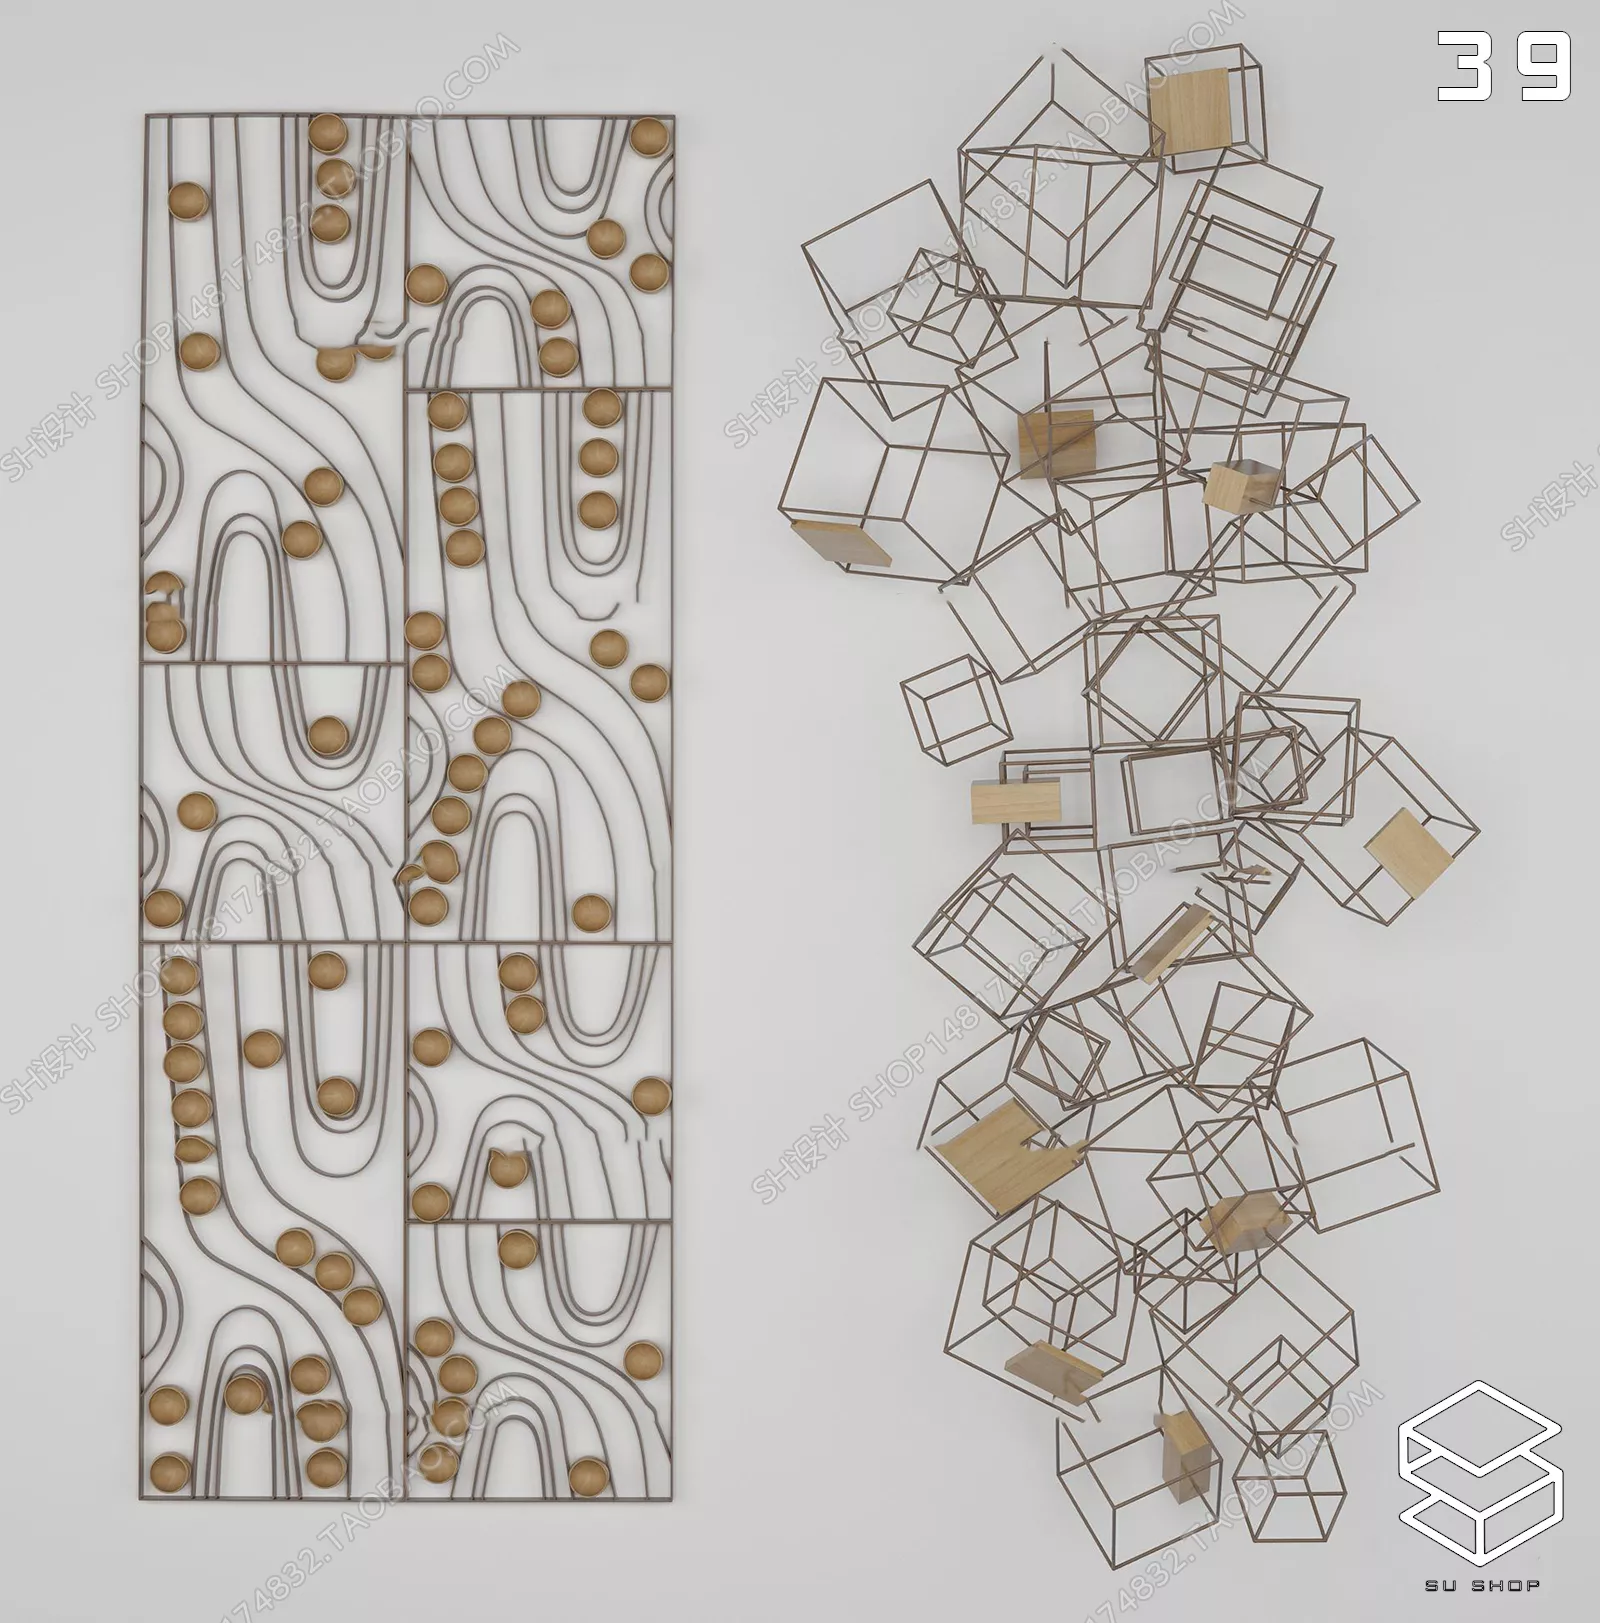 MODERN WALL DECOR - SKETCHUP 3D MODEL - VRAY OR ENSCAPE - ID15941